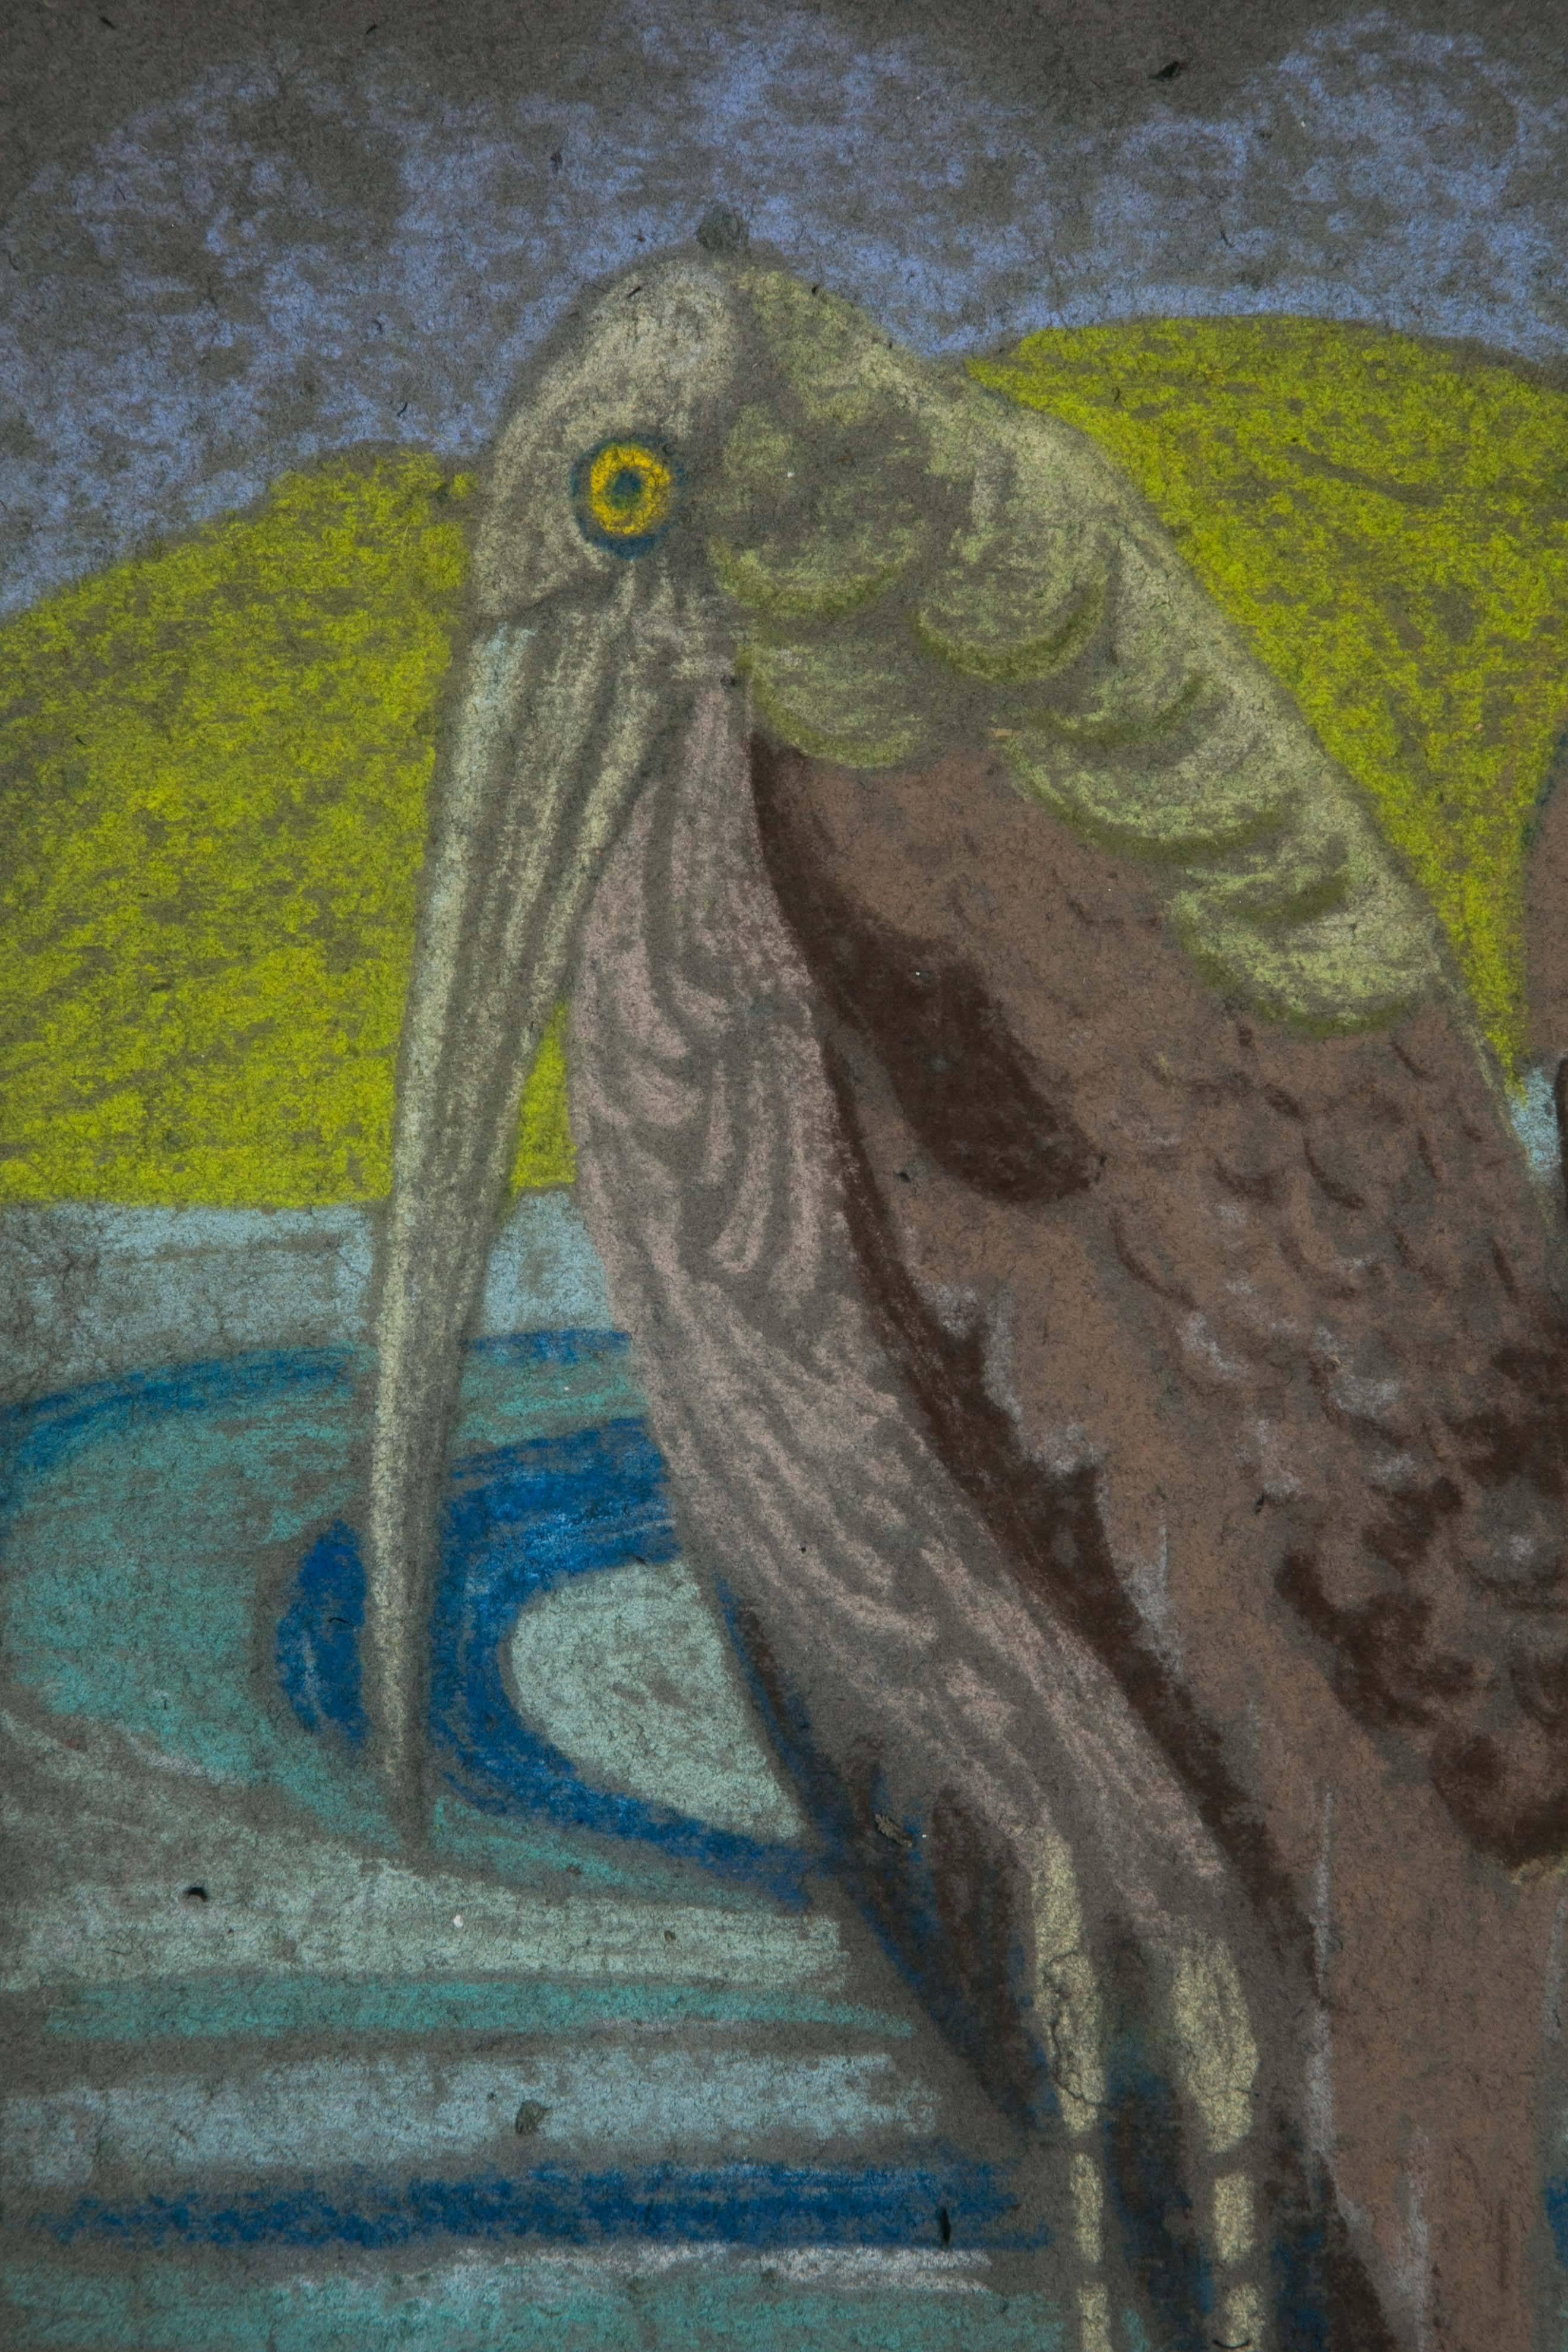 Wallpaper design. Pastel drawing on very thick paper representing a marabou bird. France, Art Deco, 1920s.
Dim: 50 x 30 cm excl frame.
Two other wallpaper designs are available with similar patterns.
        